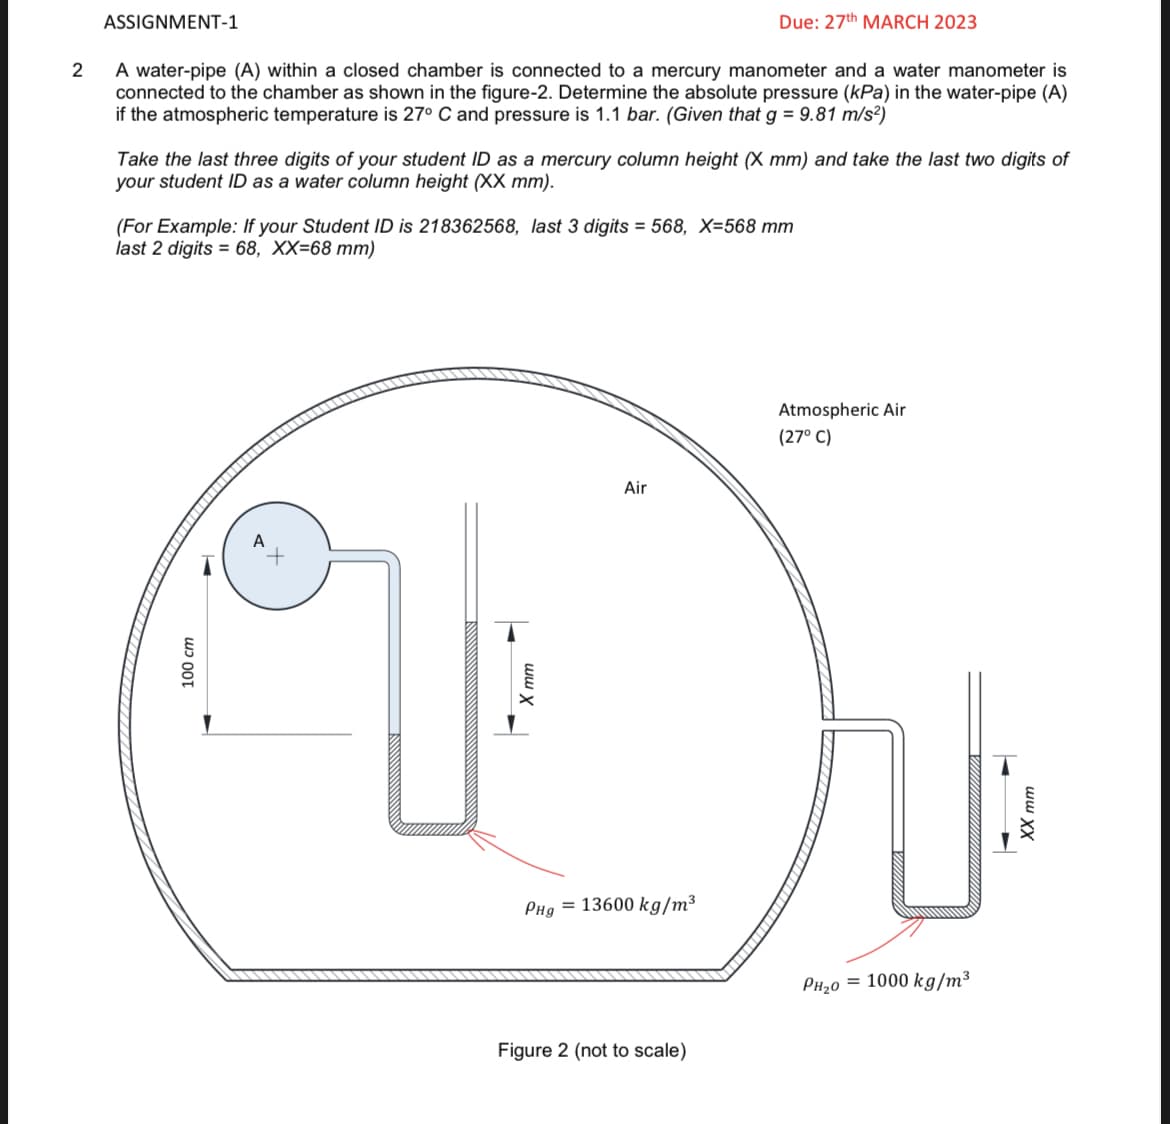 2
ASSIGNMENT-1
A water-pipe (A) within a closed chamber is connected to a mercury manometer and a water manometer is
connected to the chamber as shown in the figure-2. Determine the absolute pressure (kPa) in the water-pipe (A)
if the atmospheric temperature is 27° C and pressure is 1.1 bar. (Given that g = 9.81 m/s²)
Take the last three digits of your student ID as a mercury column height (X mm) and take the last two digits of
your student ID as a water column height (XX mm).
(For Example: If your Student ID is 218362568, last 3 digits = 568, X=568 mm
last 2 digits = 68, XX=68 mm)
100 cm
A
Due: 27th MARCH 2023
Air
PHg = 13600 kg/m³
Figure 2 (not to scale)
Atmospheric Air
(27° C)
PH₂0 = 1000 kg/m³
XX mm